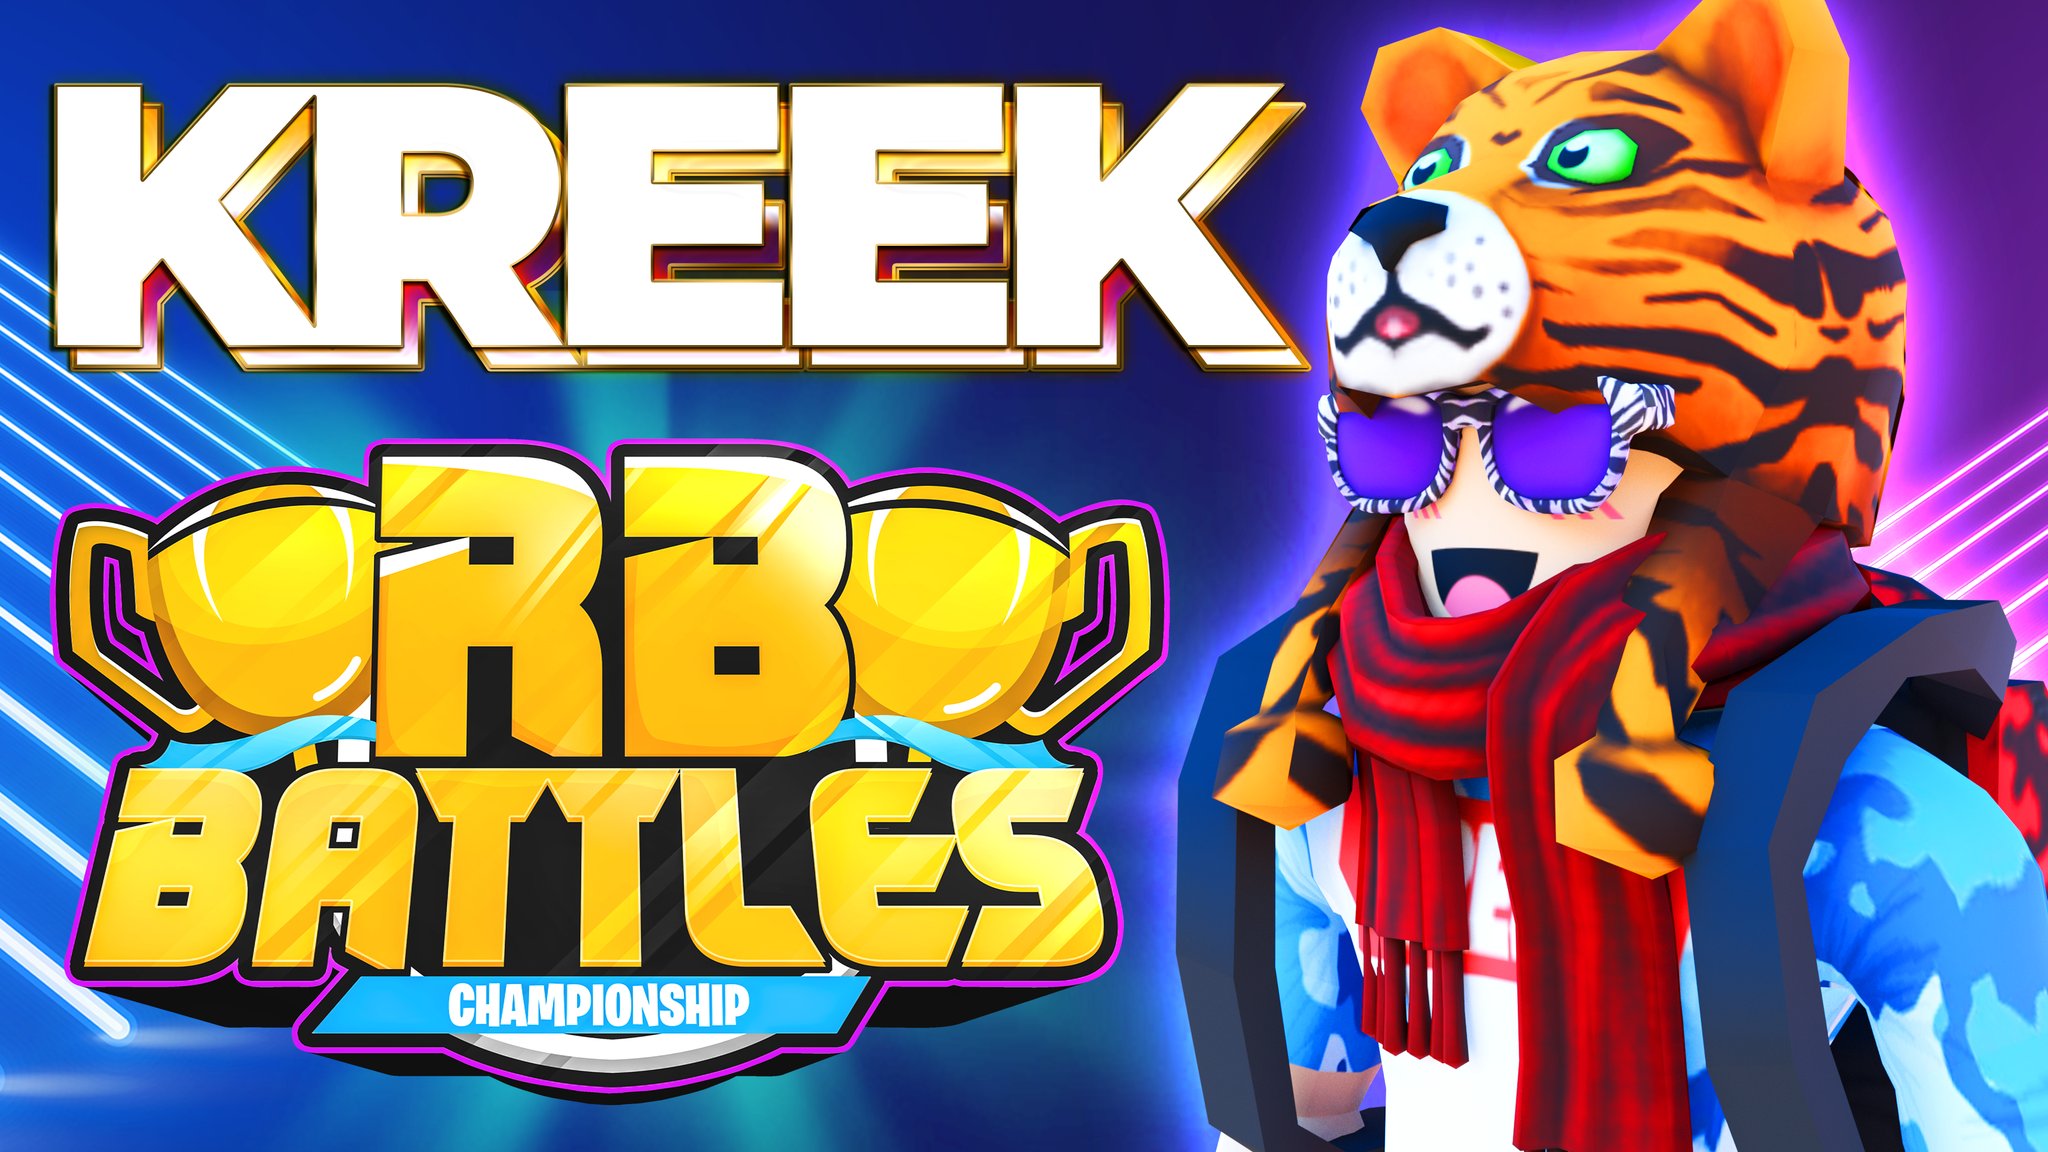 Roblox Battles On Twitter The Next Guest Joining The Rb Battles Tournament Is Kreekcraft We Re Revealing A New Tournament Guest Daily Any Guesses Who Else Will Be In The Tournament - for kreek roblox